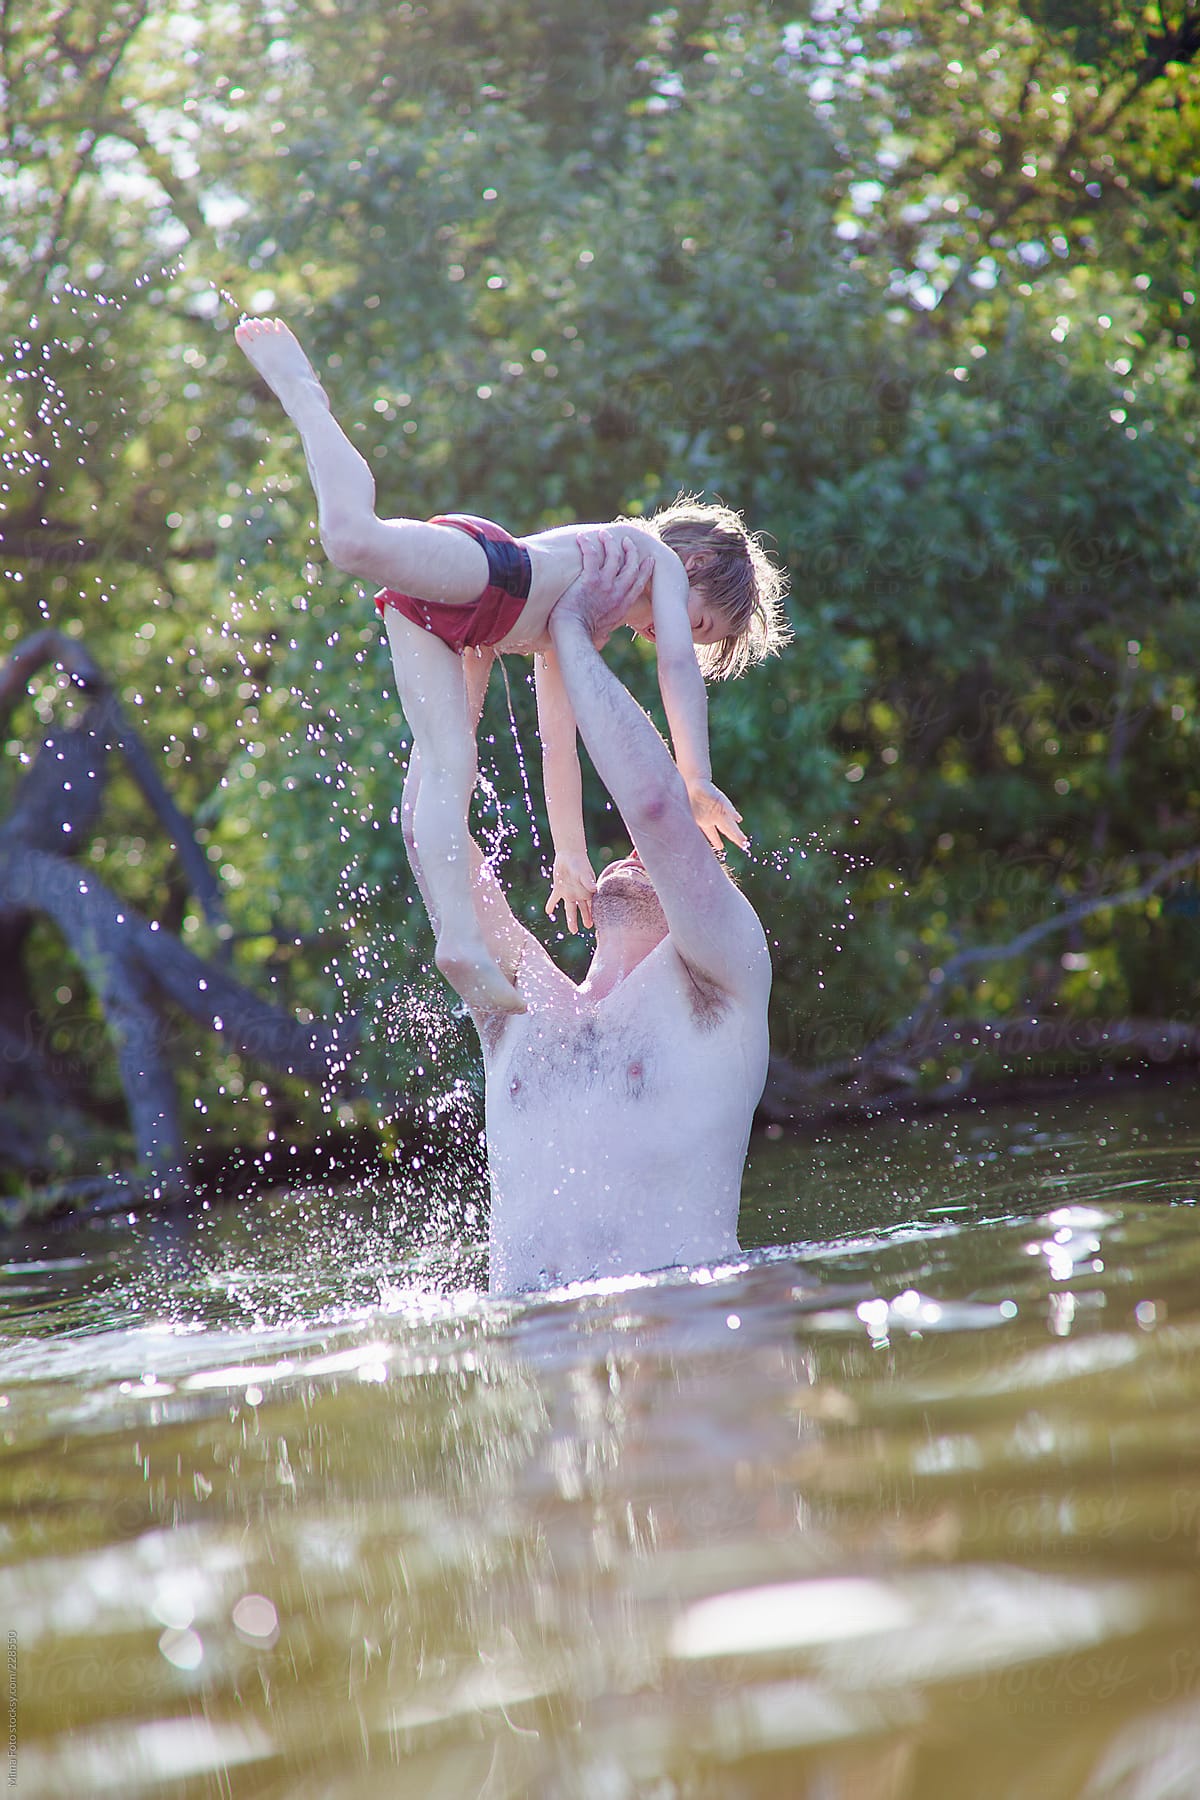 Dad raising his son from the water